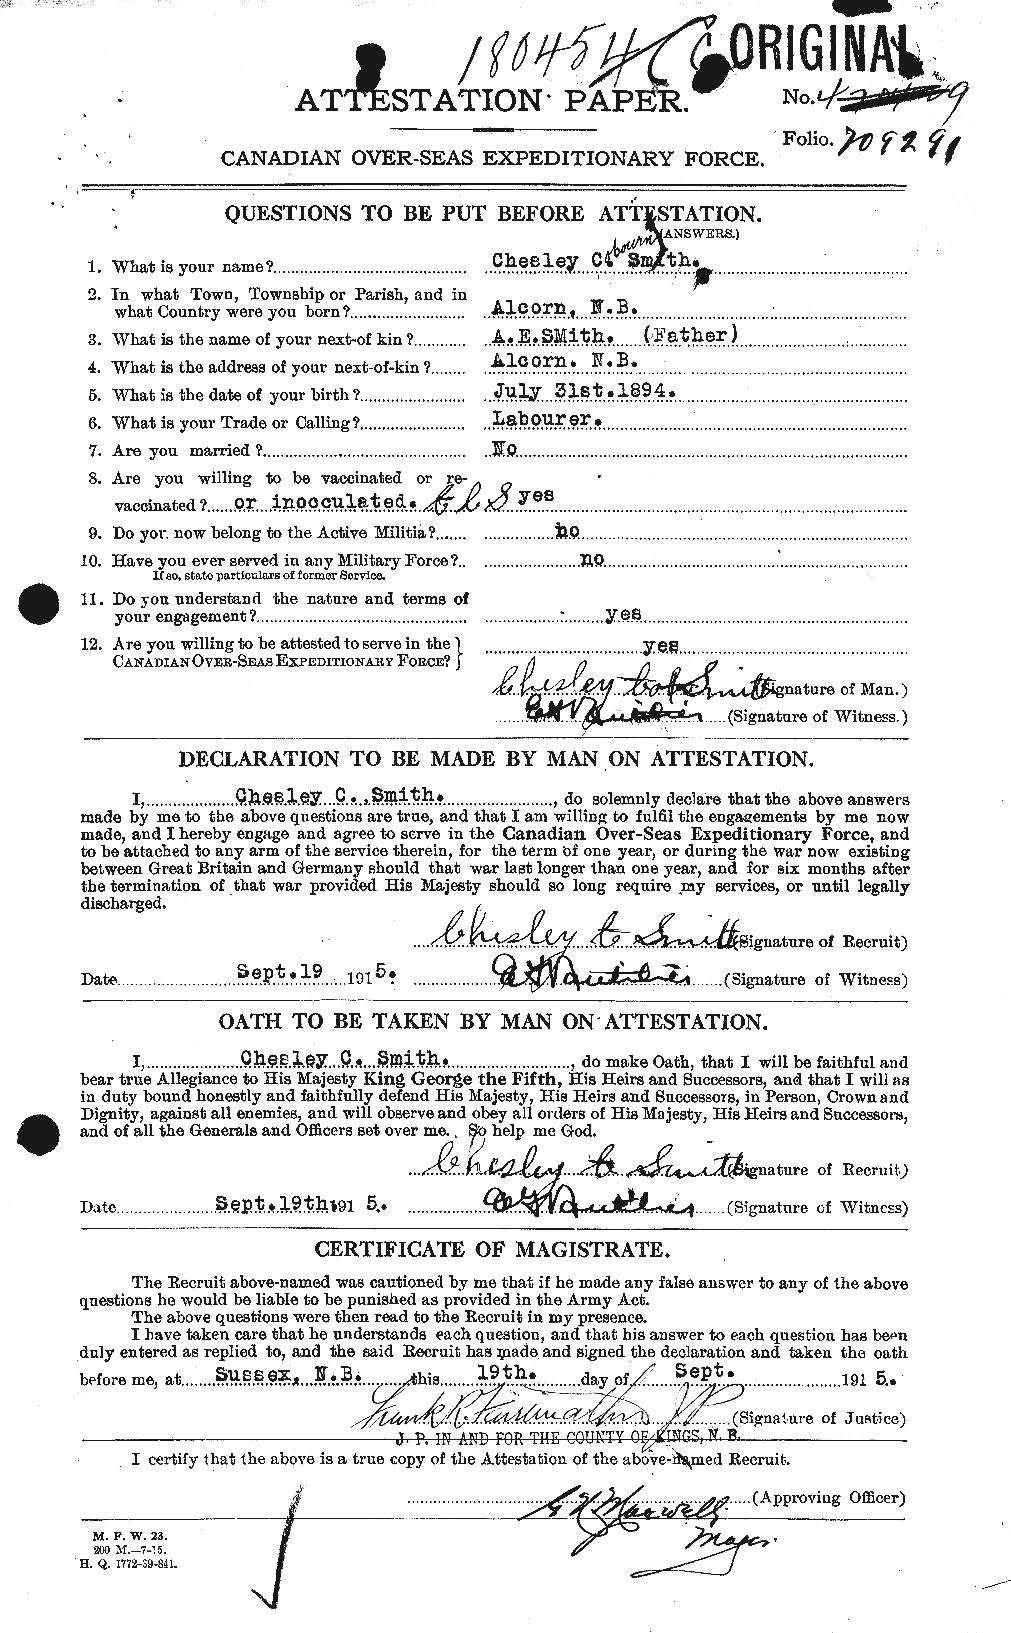 Personnel Records of the First World War - CEF 104037a